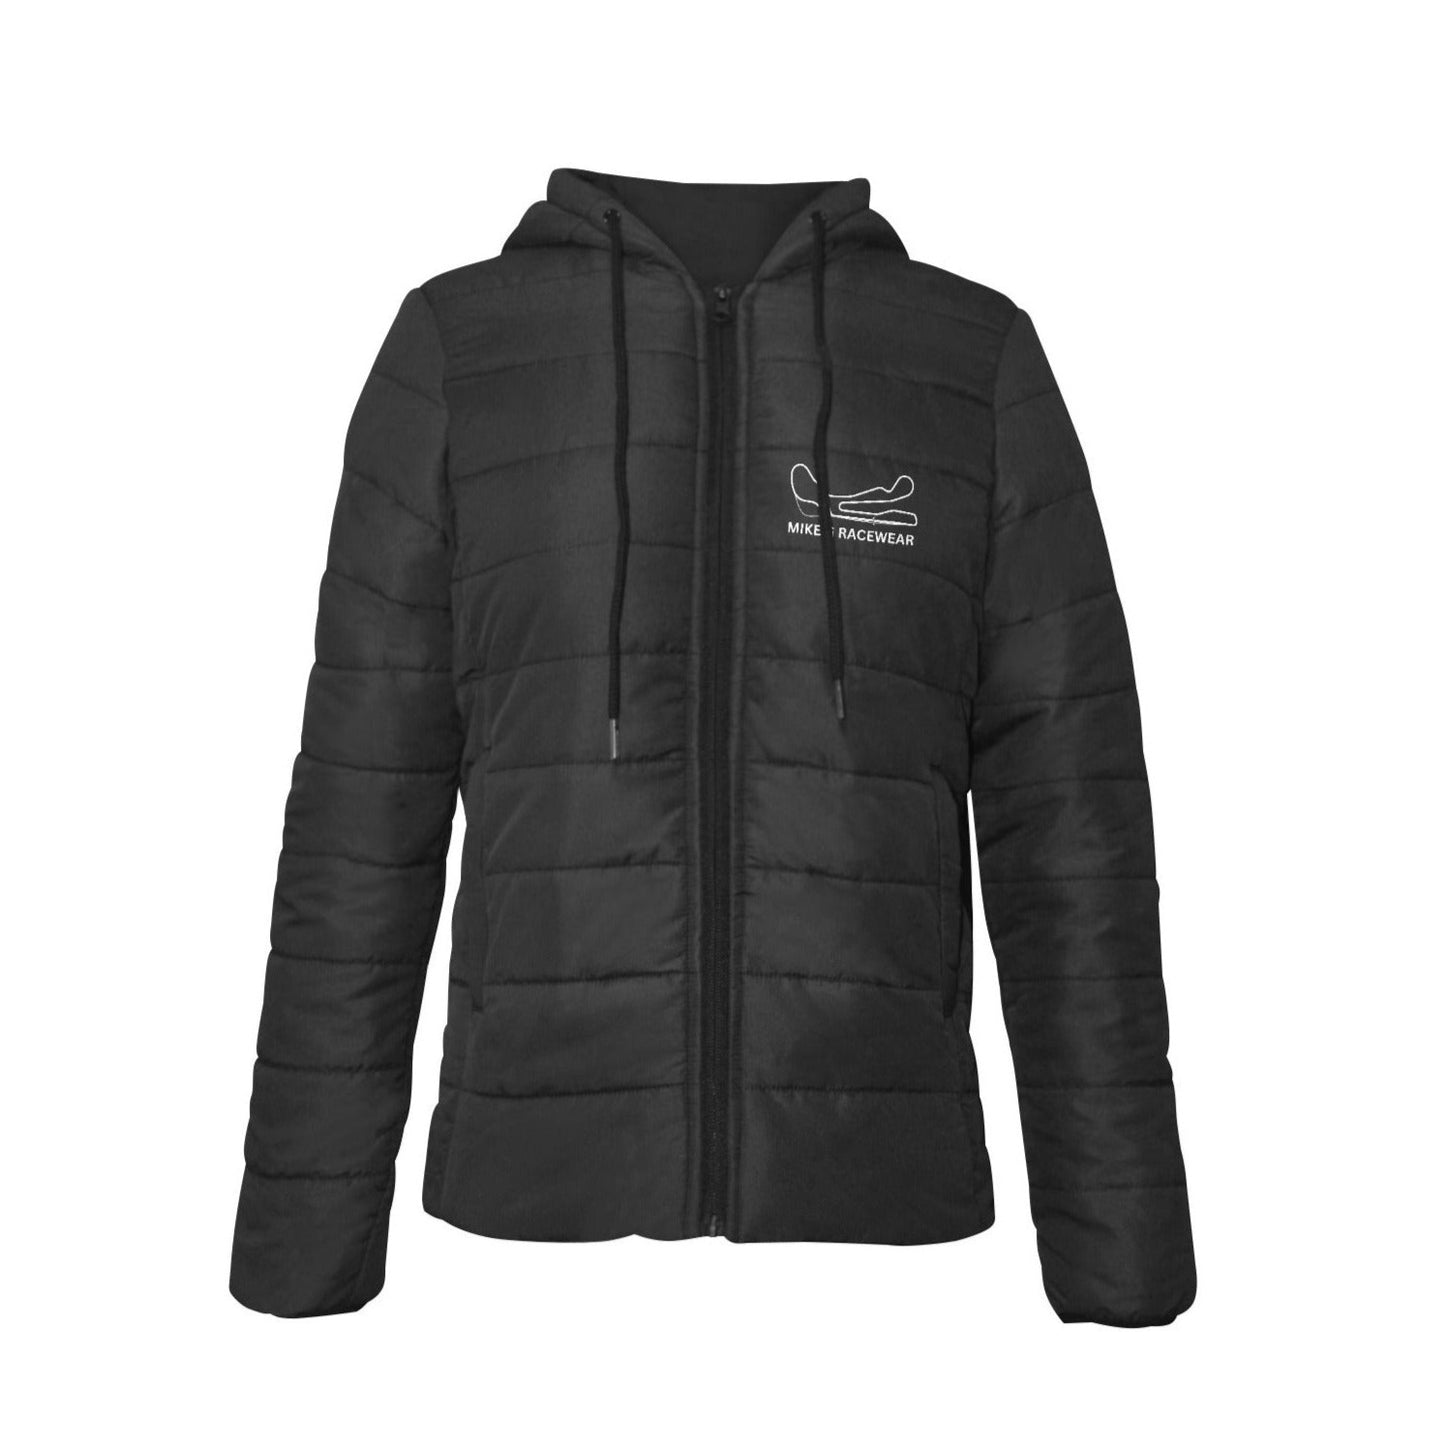 CIRCUITO MIKE G - Women's Hooded puffer jacket - carbon